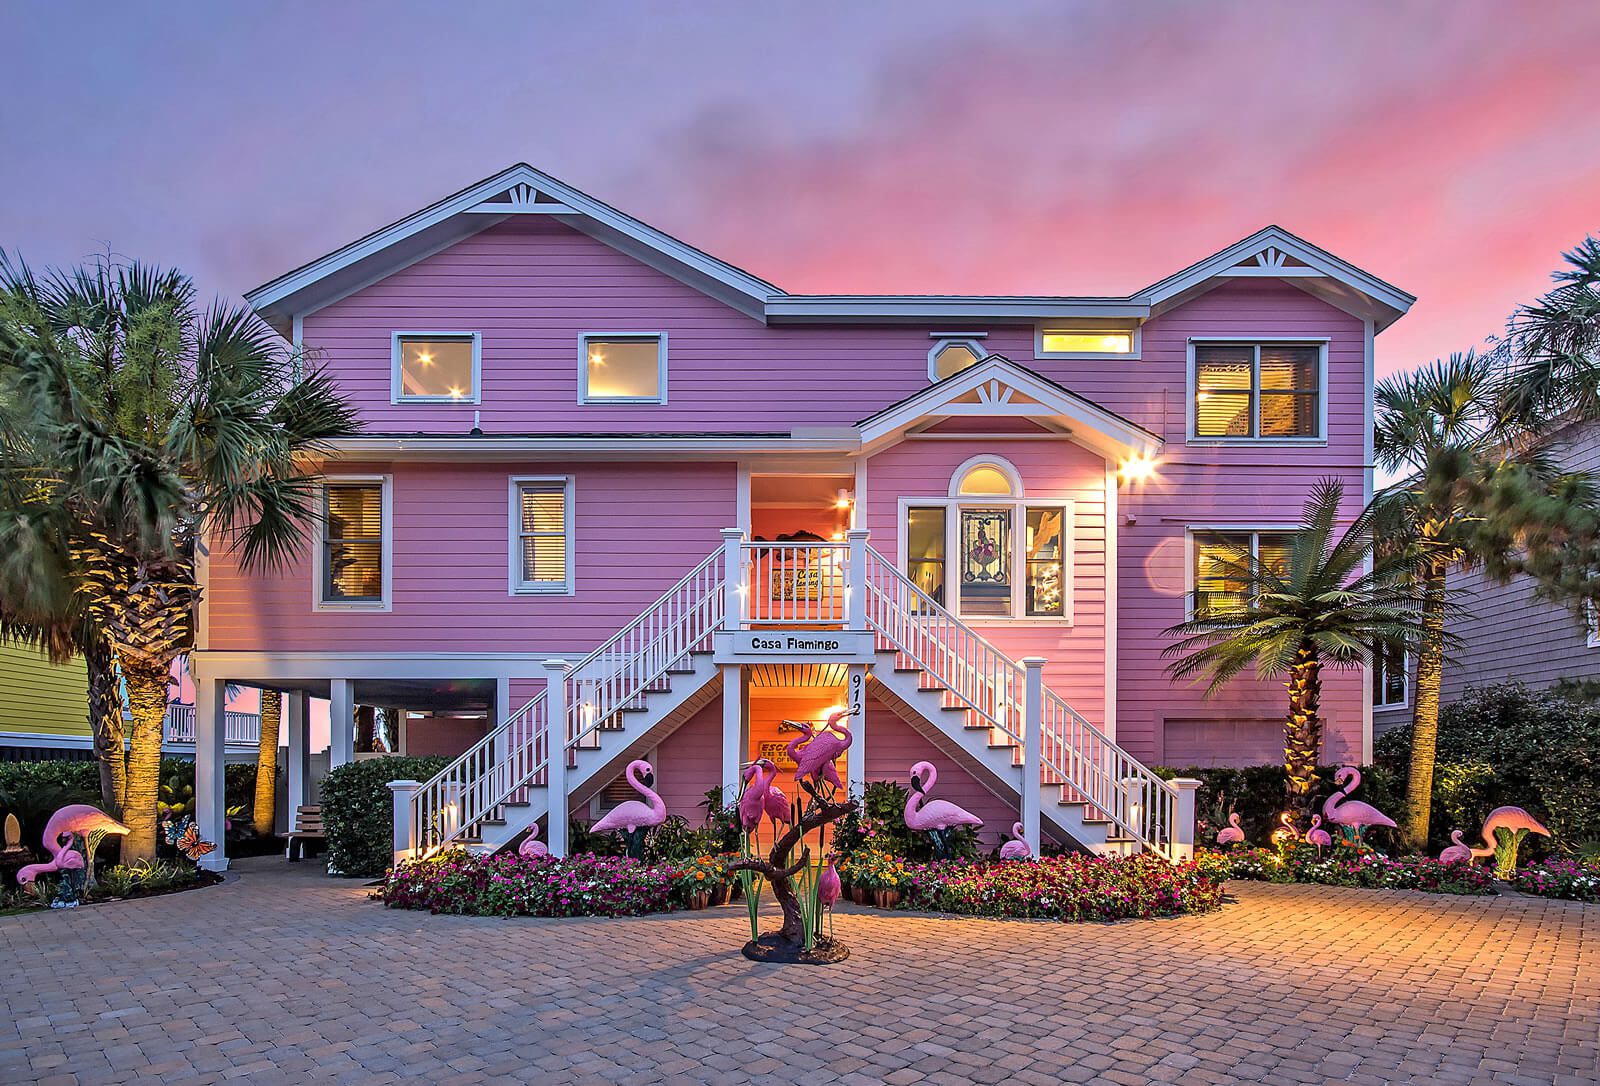 Casa Flamingo Front of Home After Hours - Isle of Palms, SC